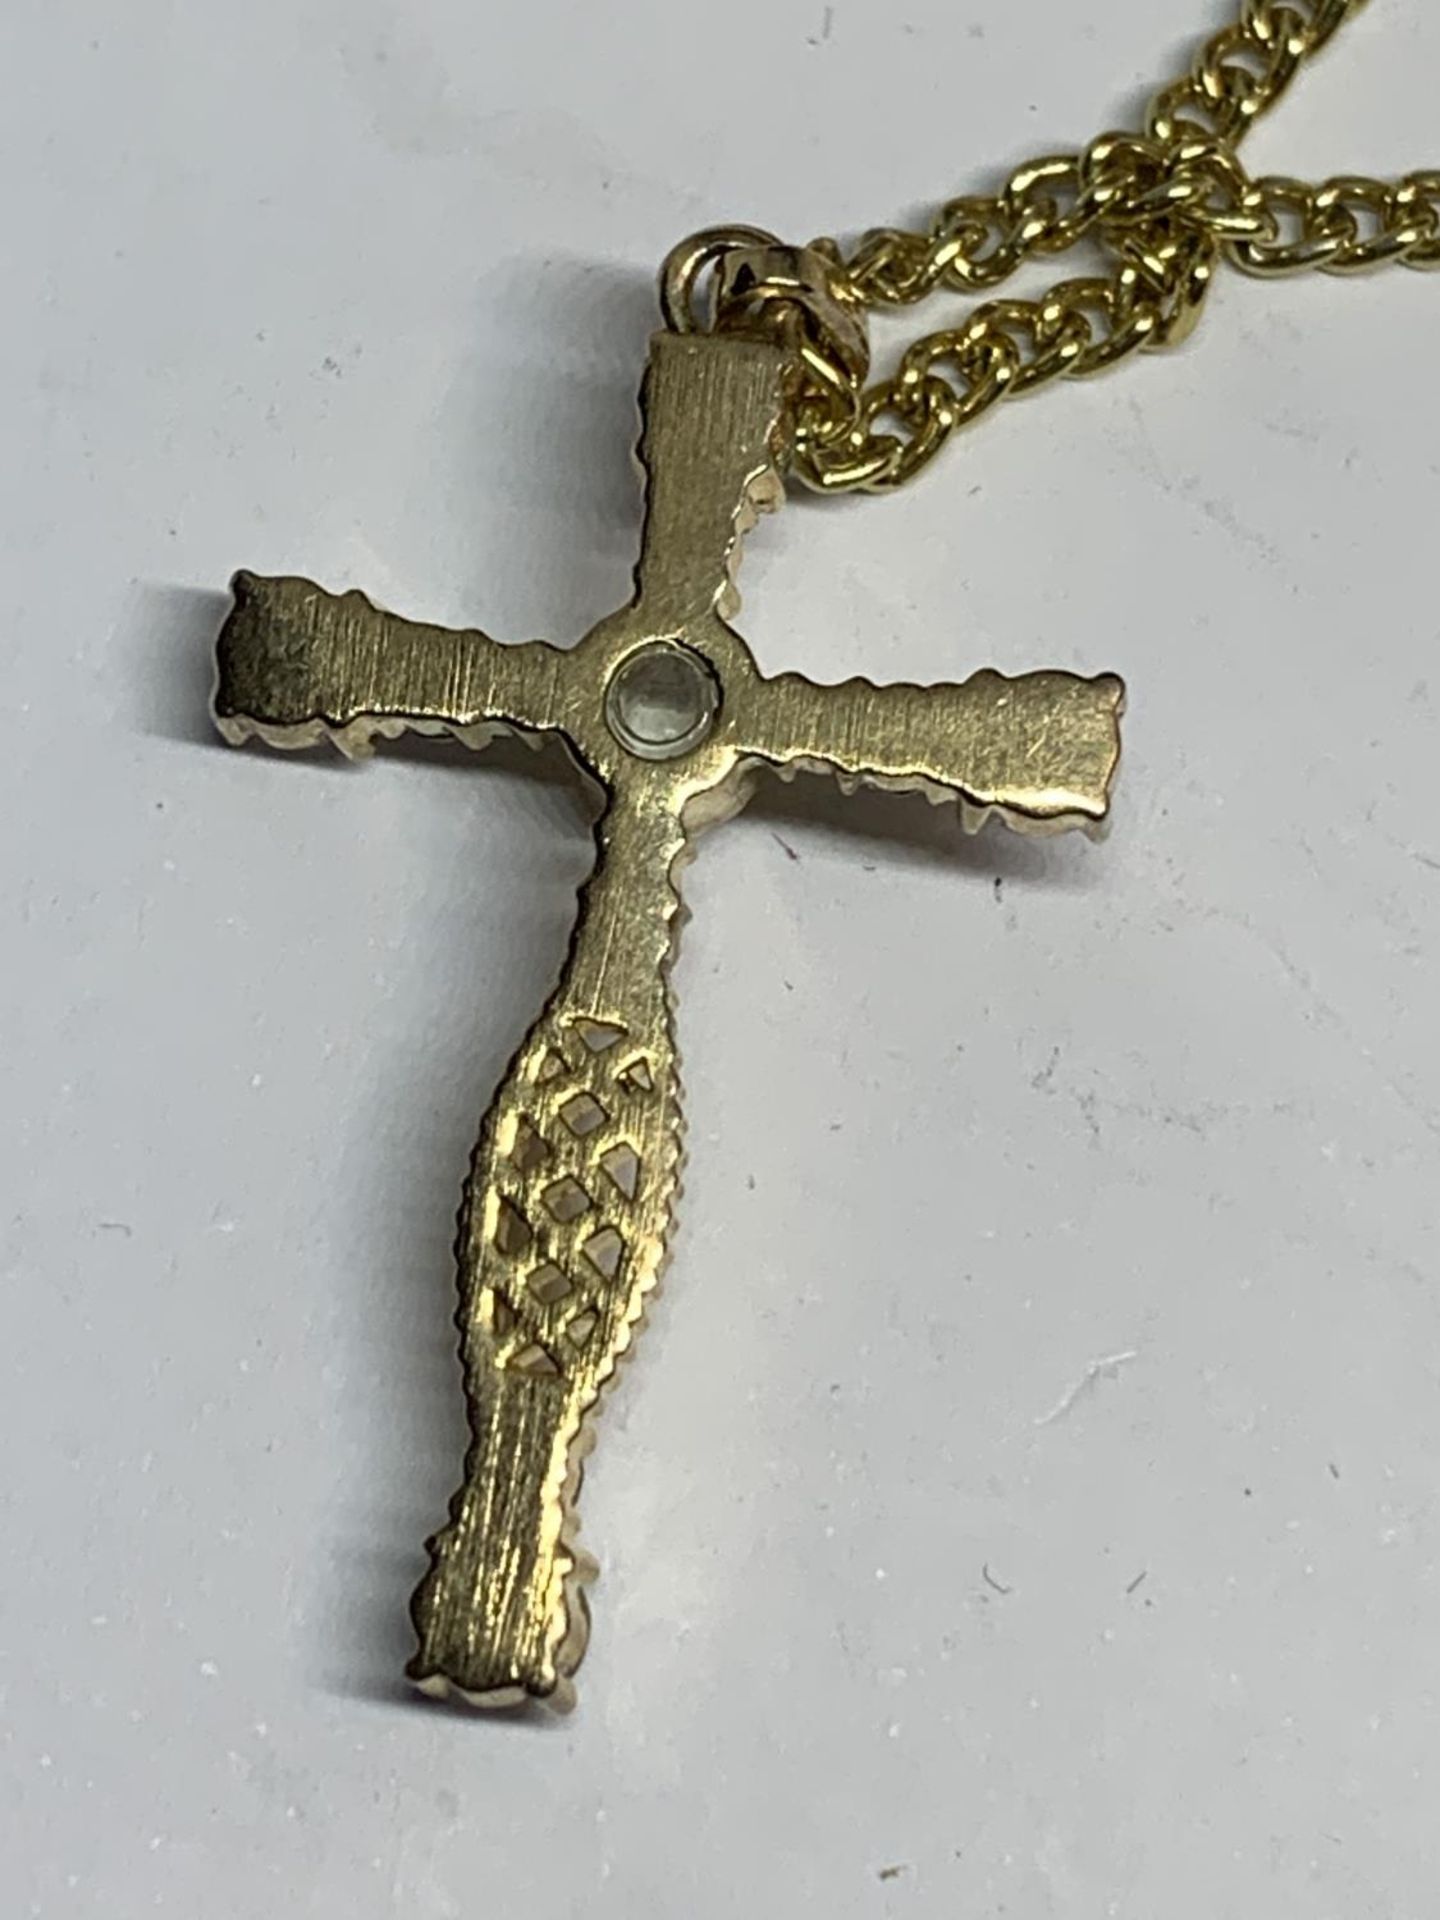 A NECKLACE WITH A CRYSTAL CROSS IN A PRESENTATION BOX - Image 3 of 3